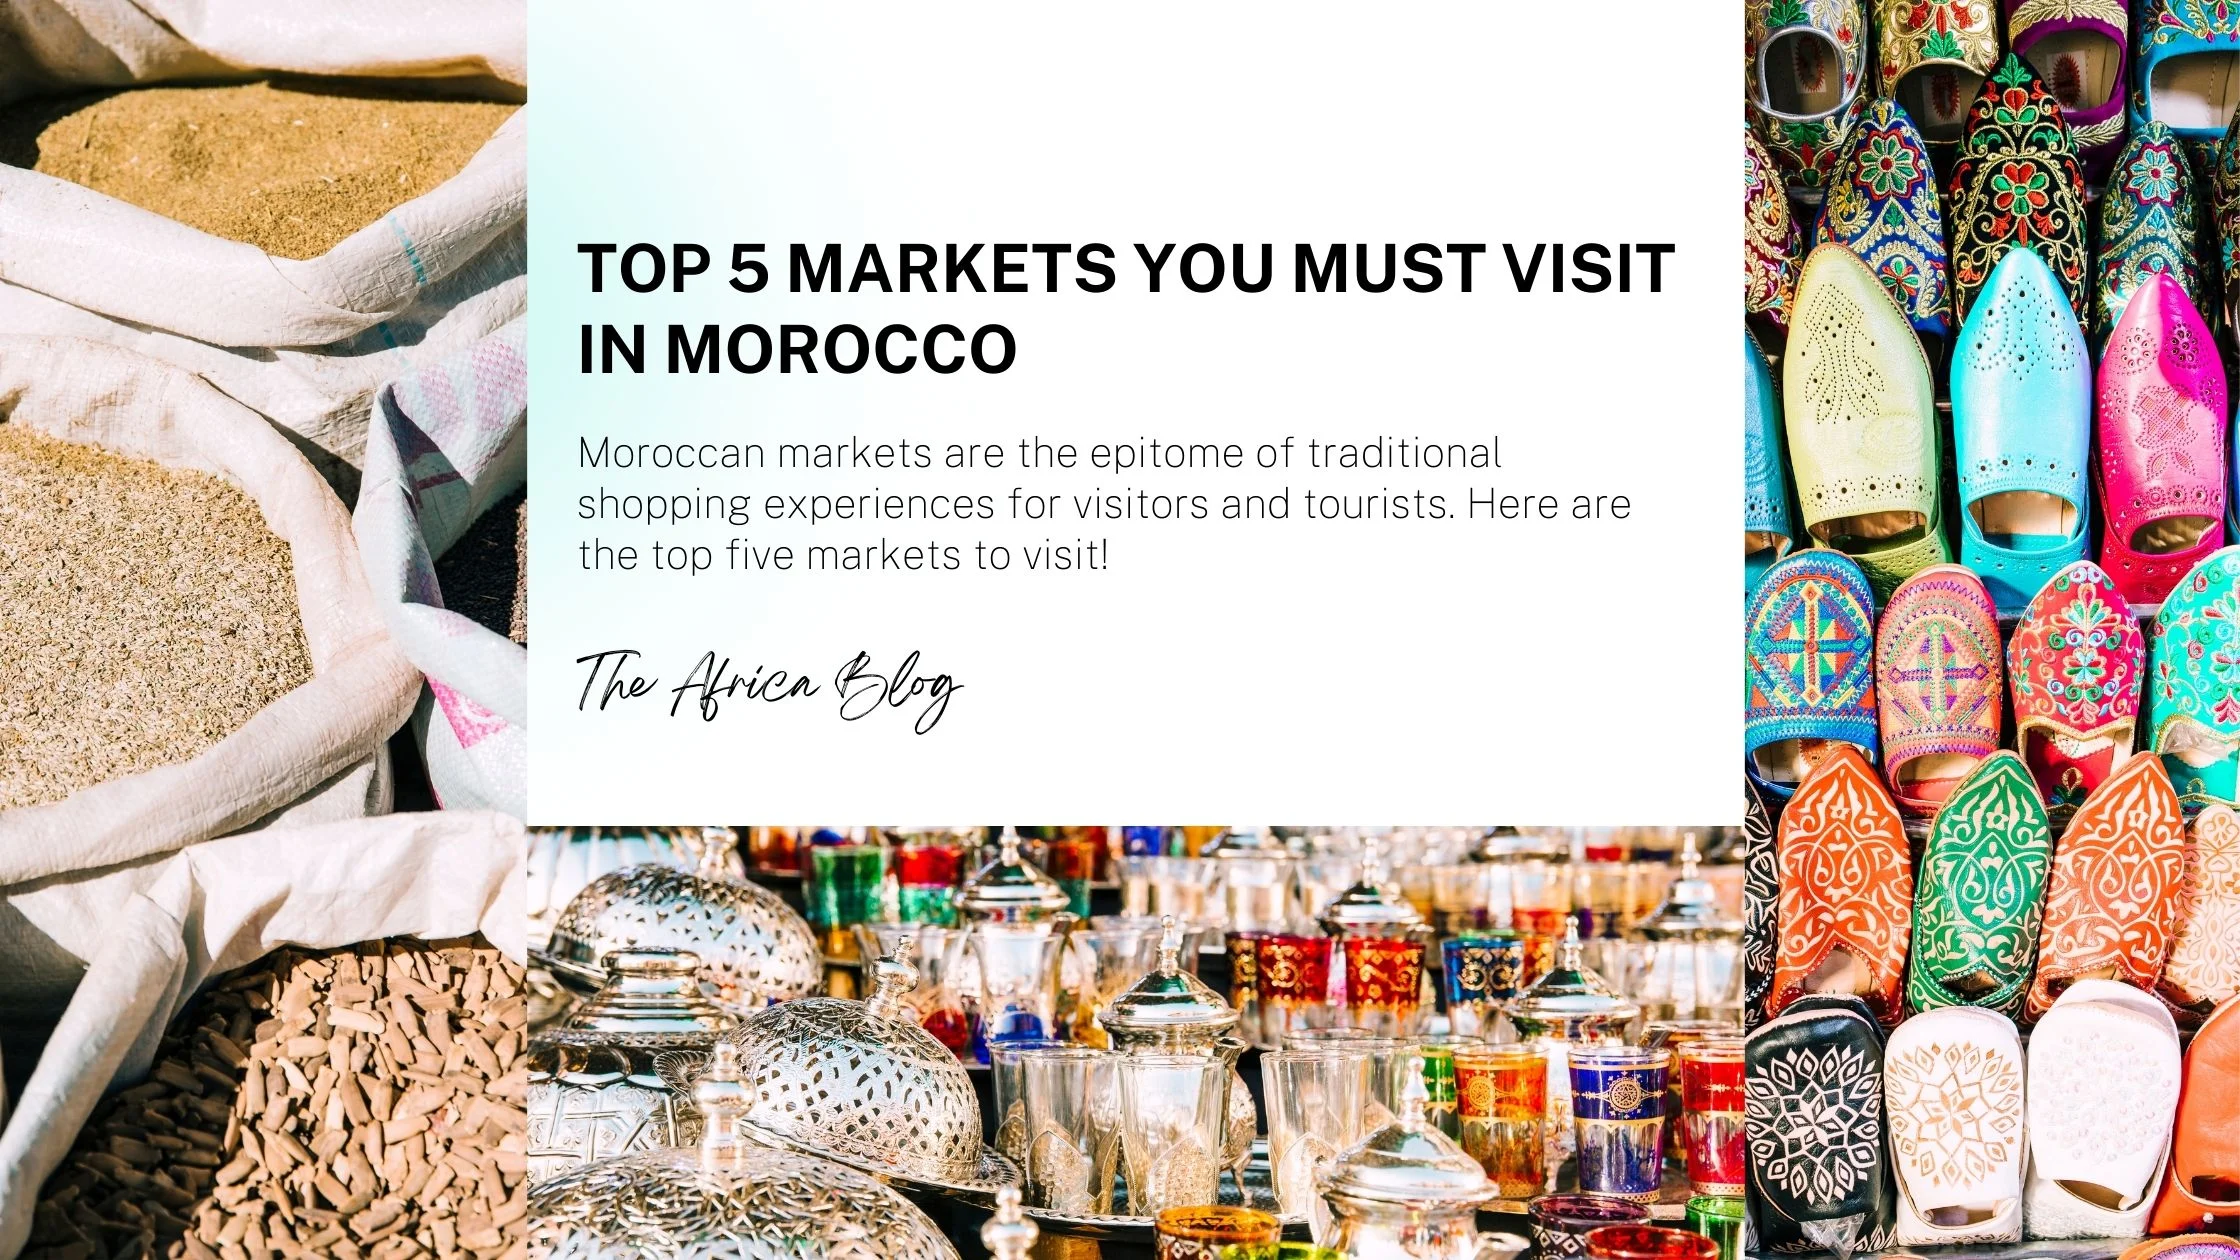 Top 5 Markets you Must Visit in Morocco